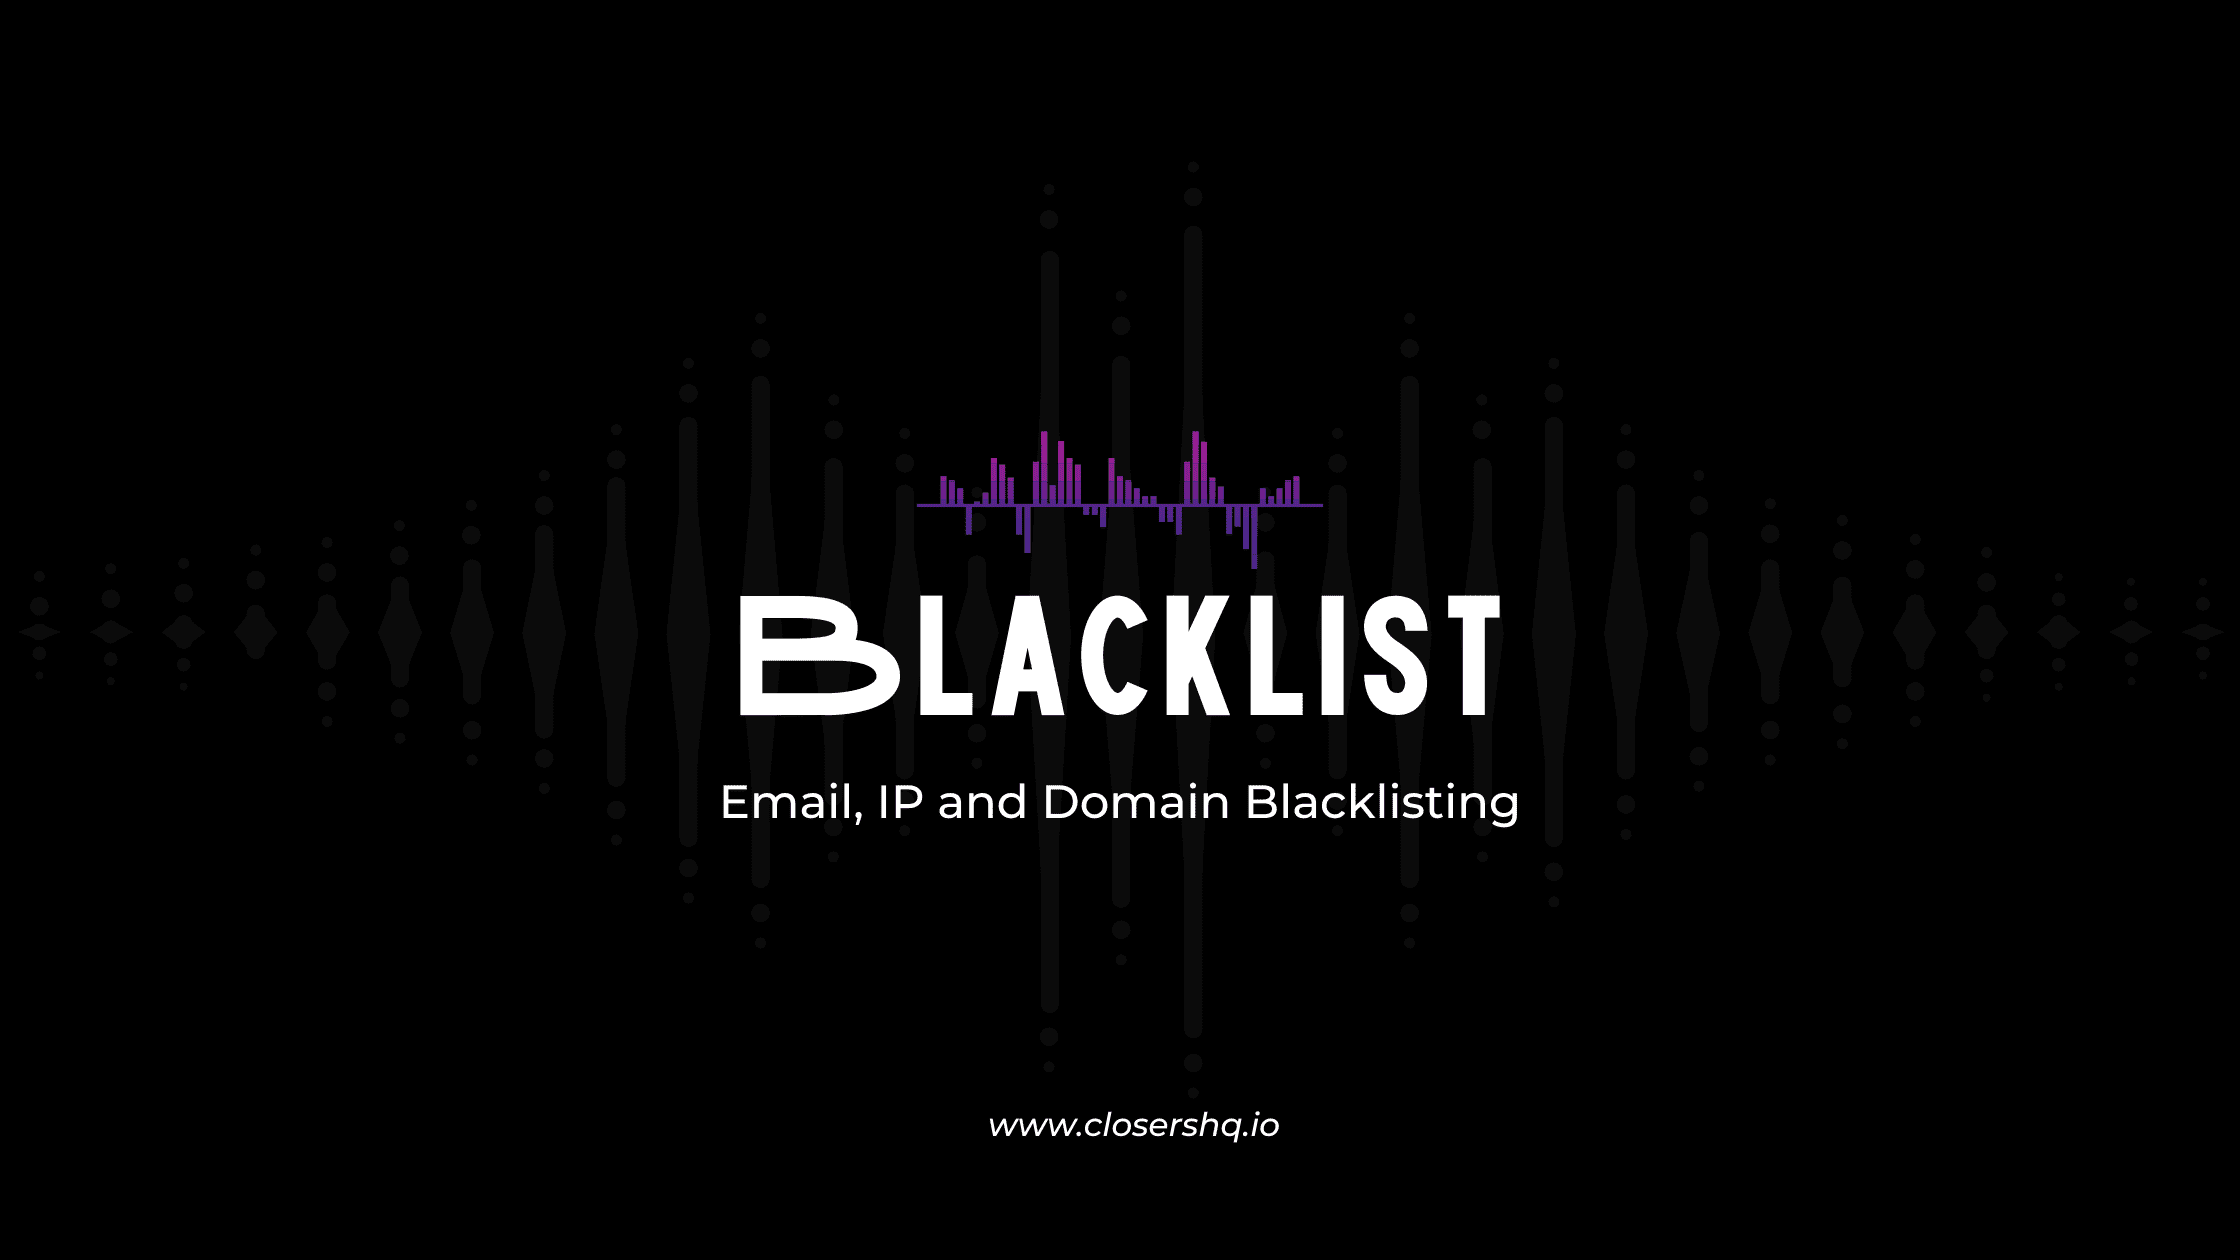 What is Blacklisting